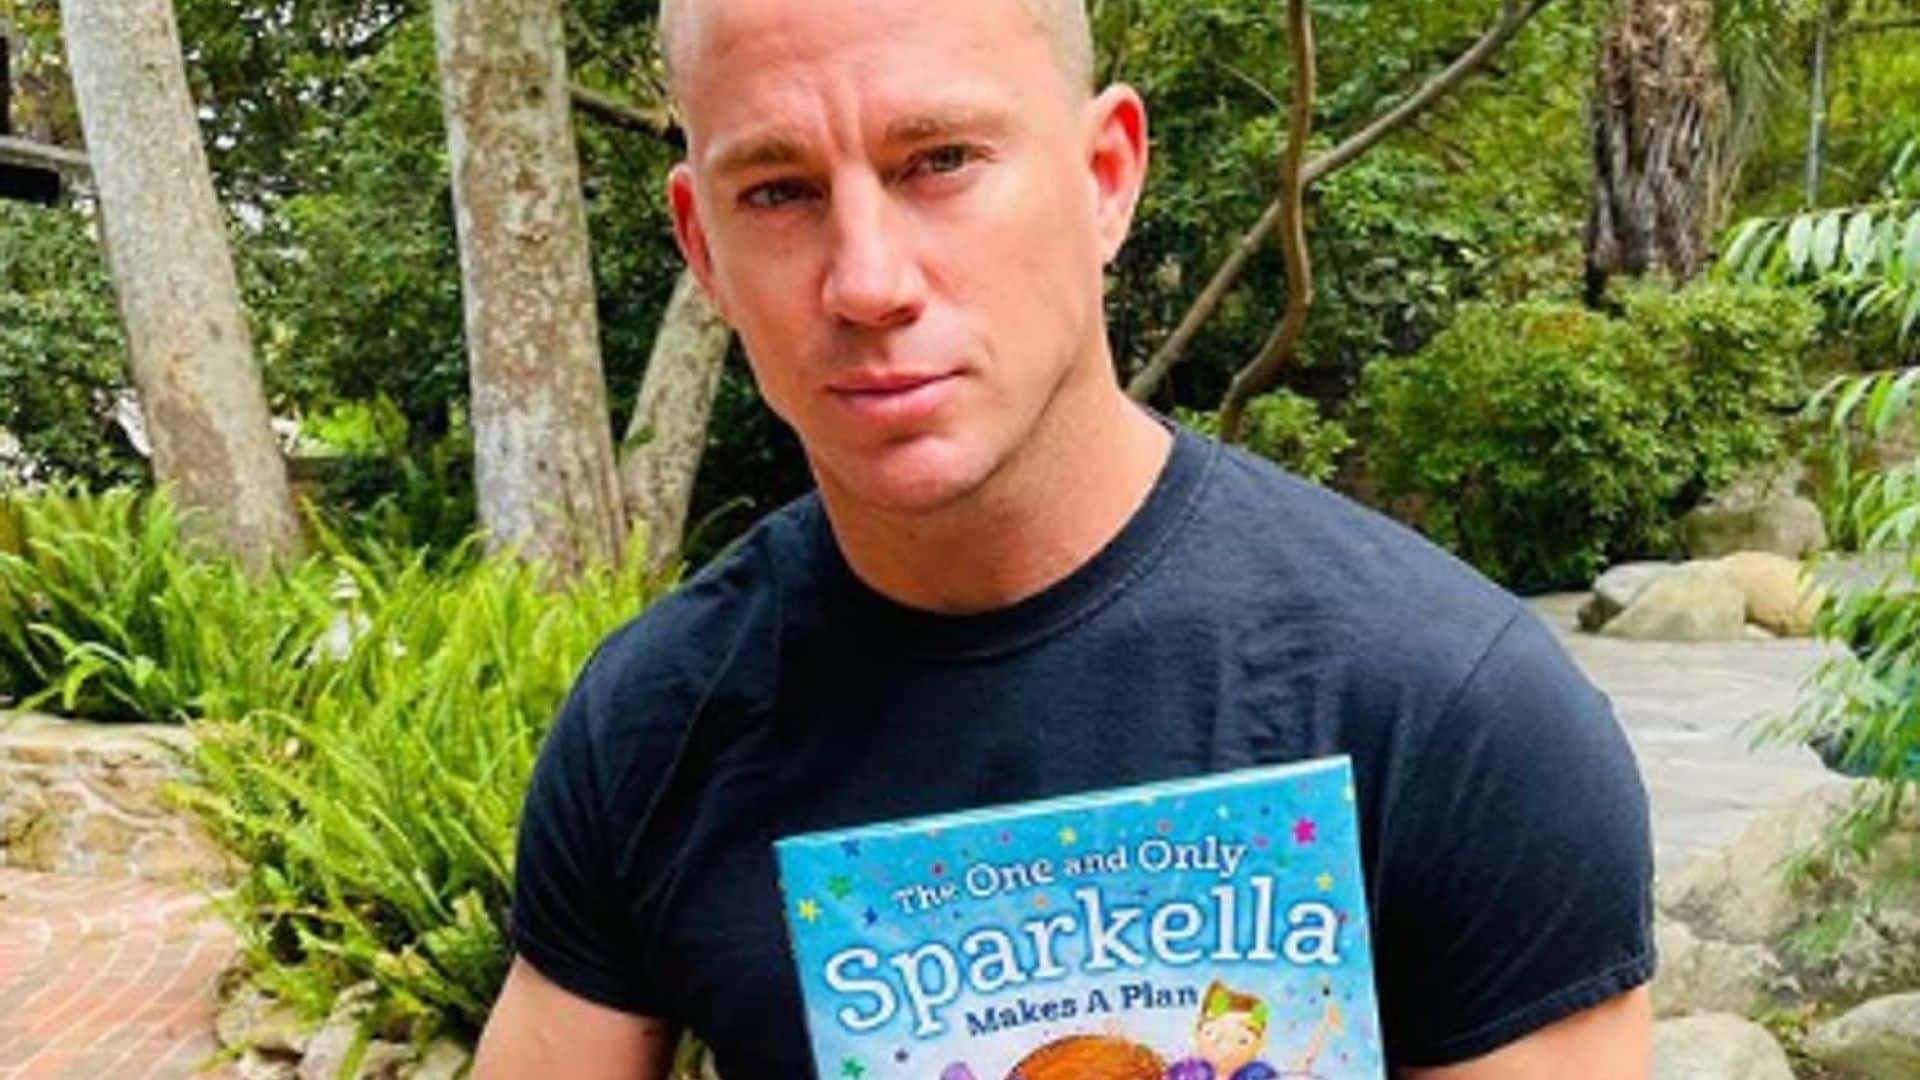 Channing Tatum is turning his children’s book into a movie, inspired by his daughter Everly